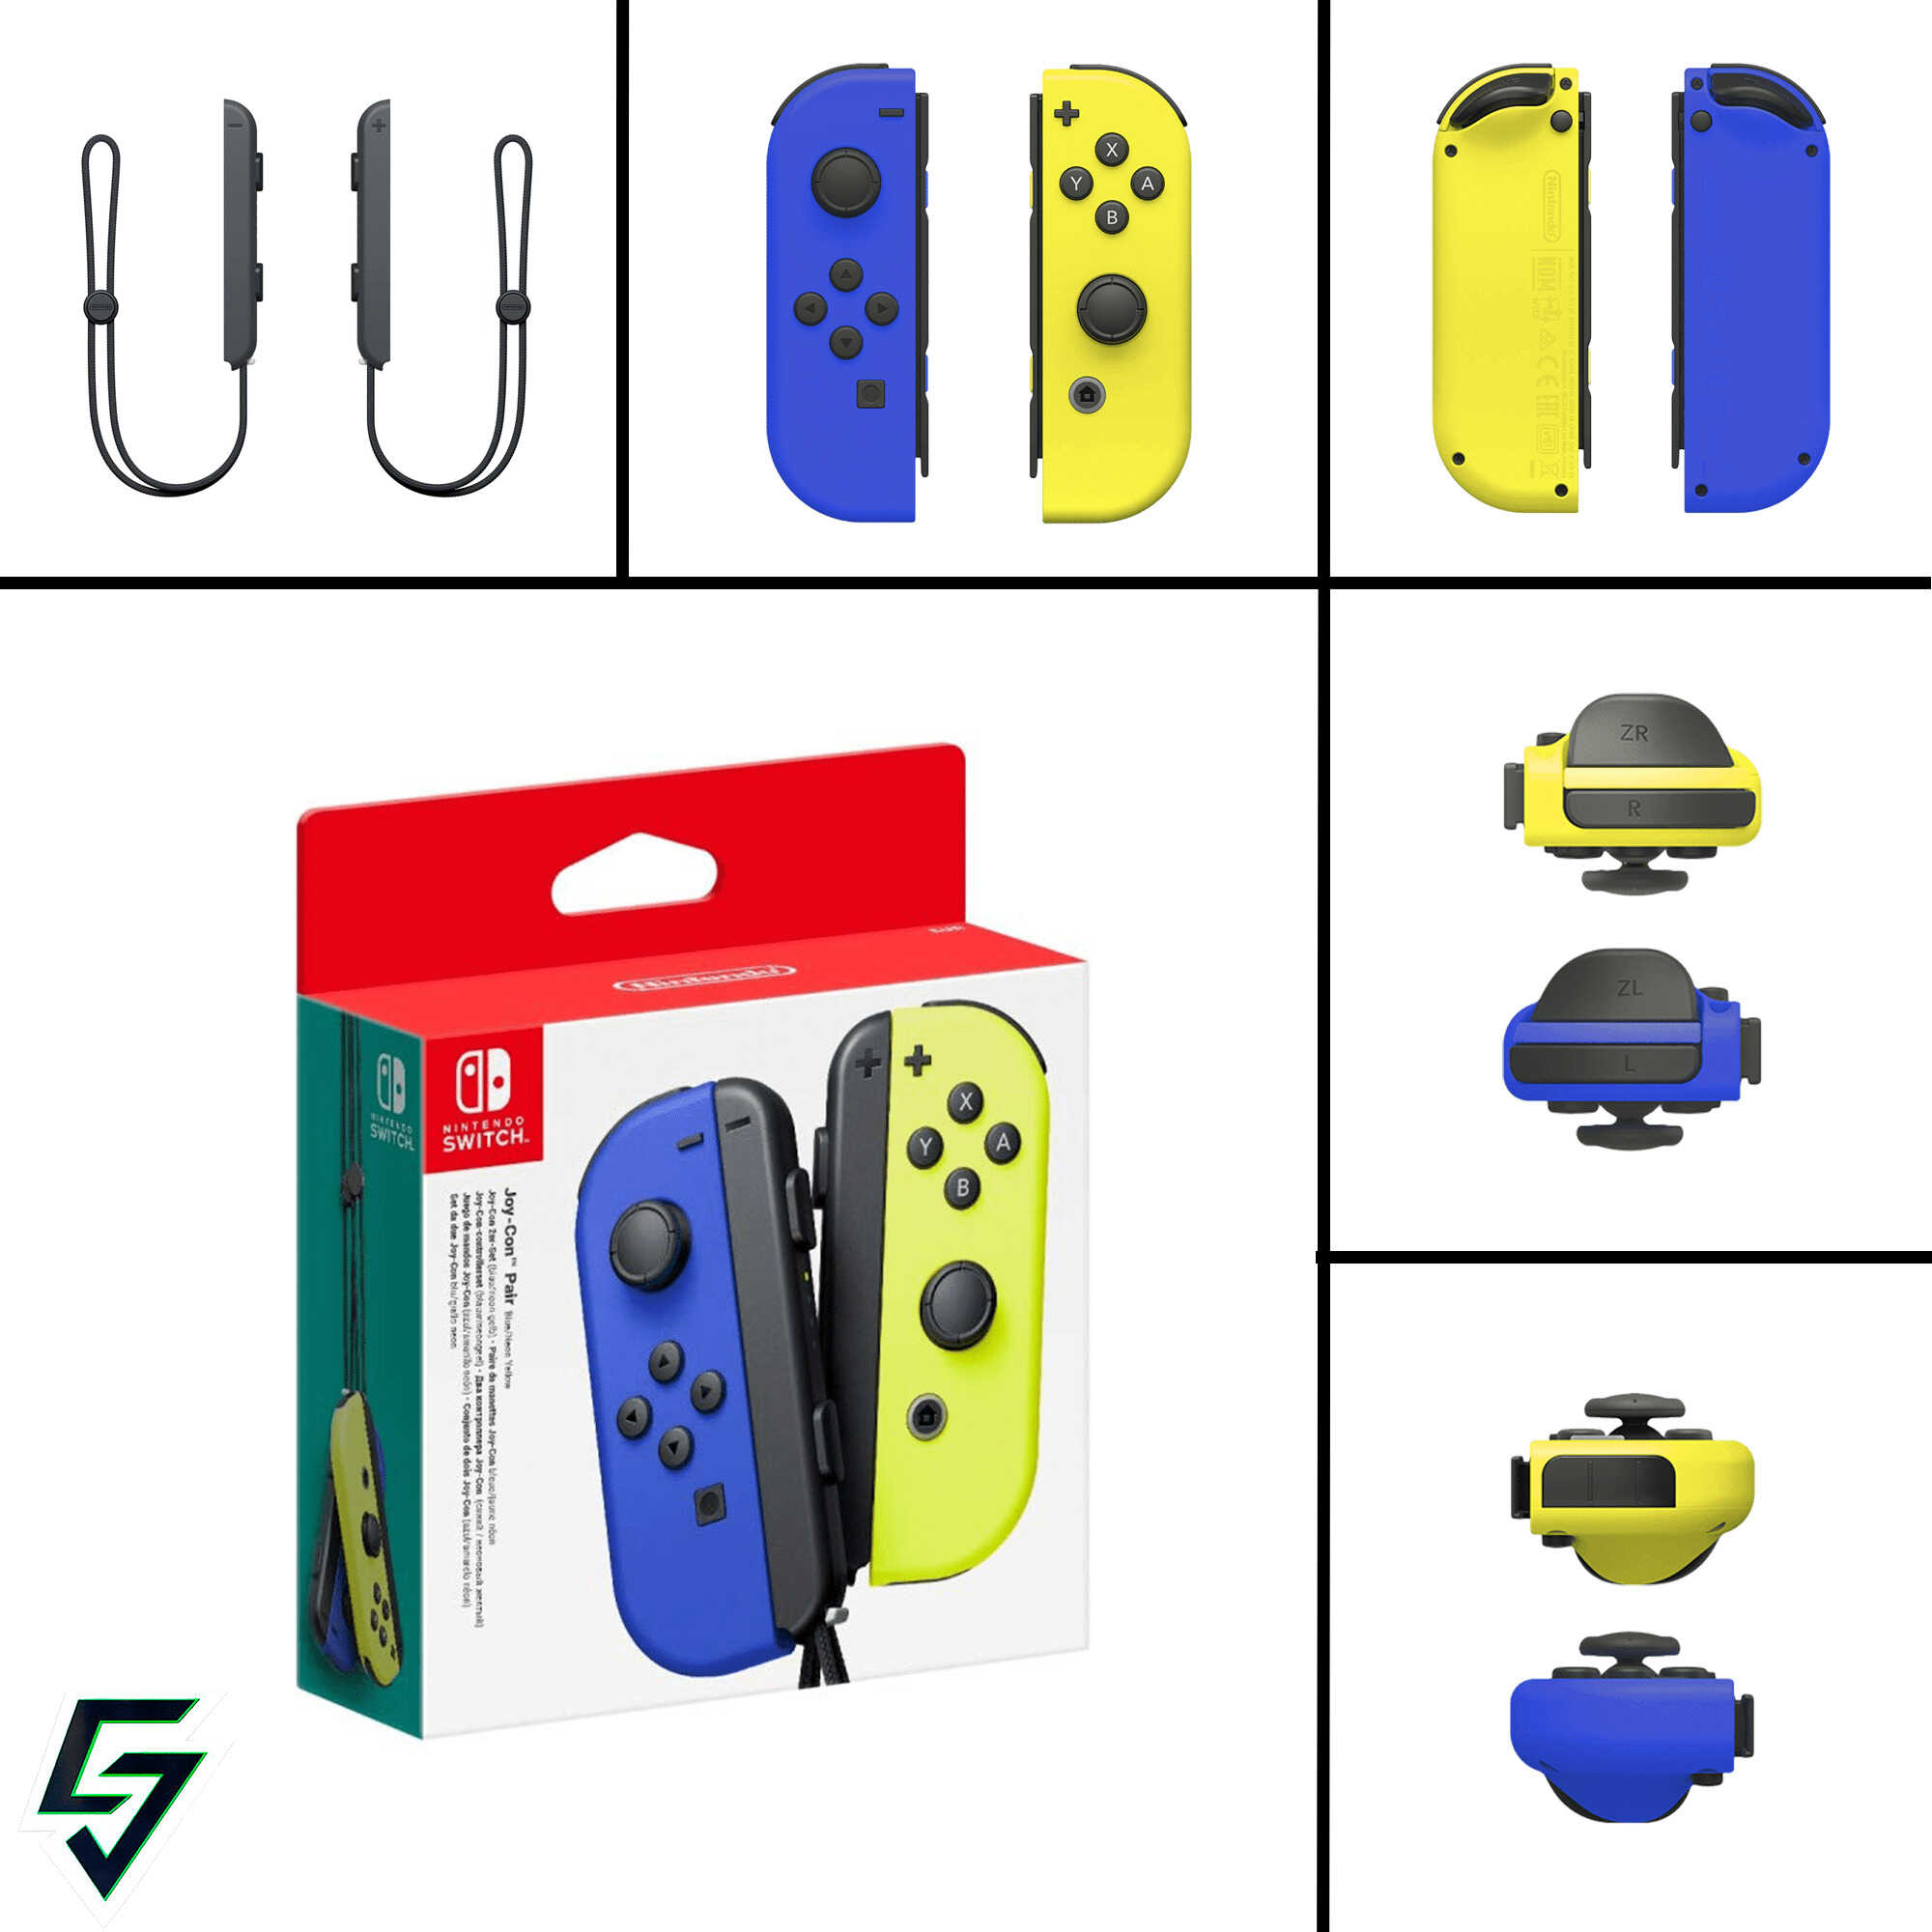 JOY-CON BLUE AND YELLOW